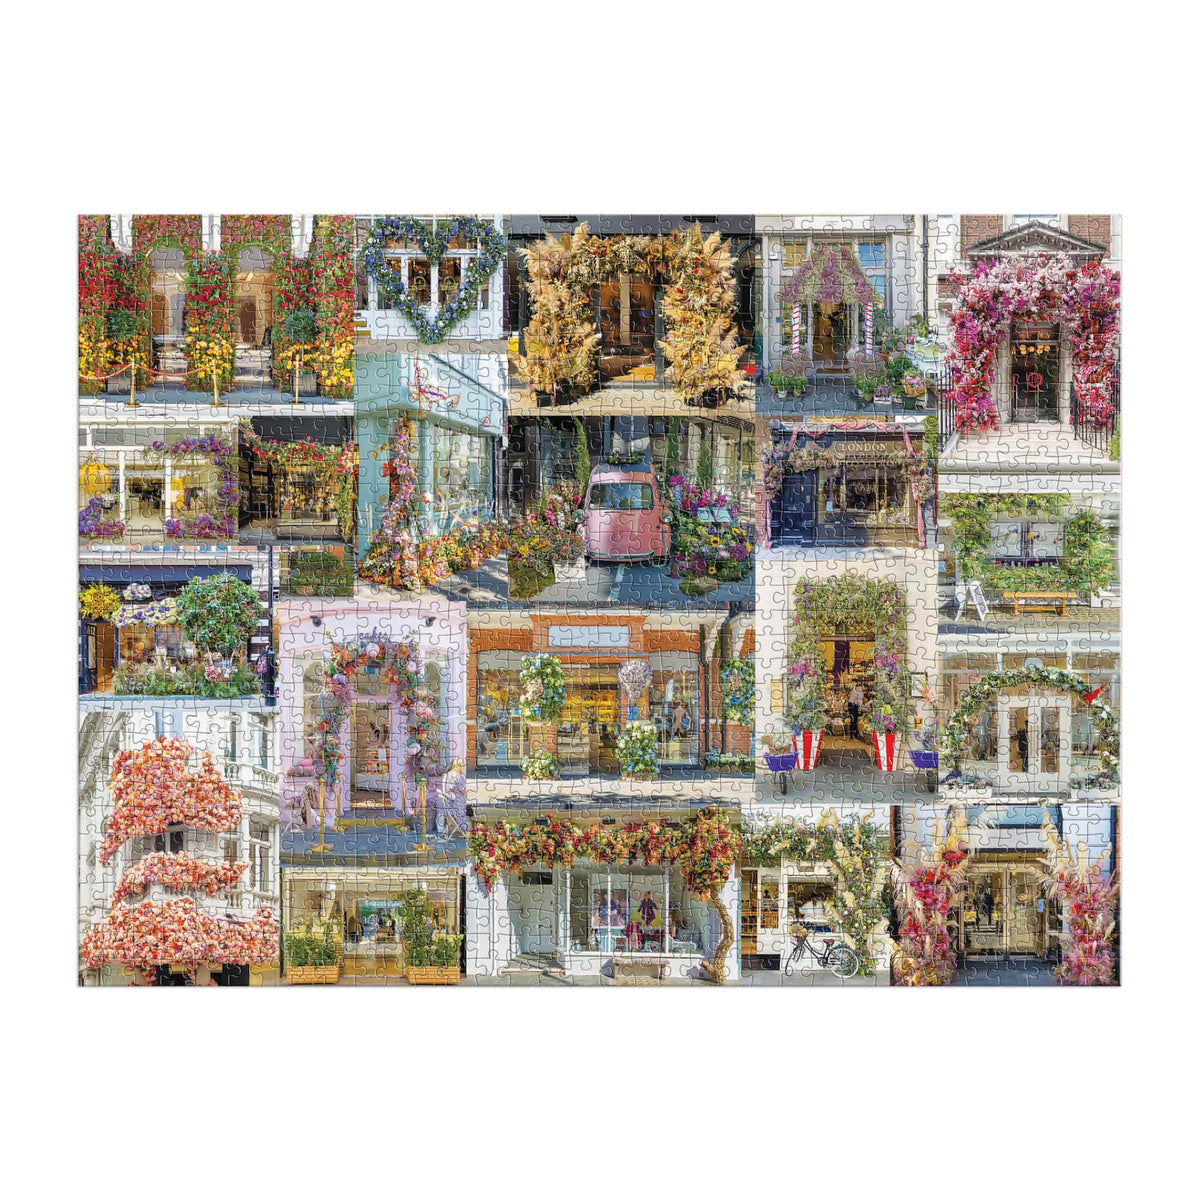 London in Bloom 1000 Piece Puzzle James Ogilvy 